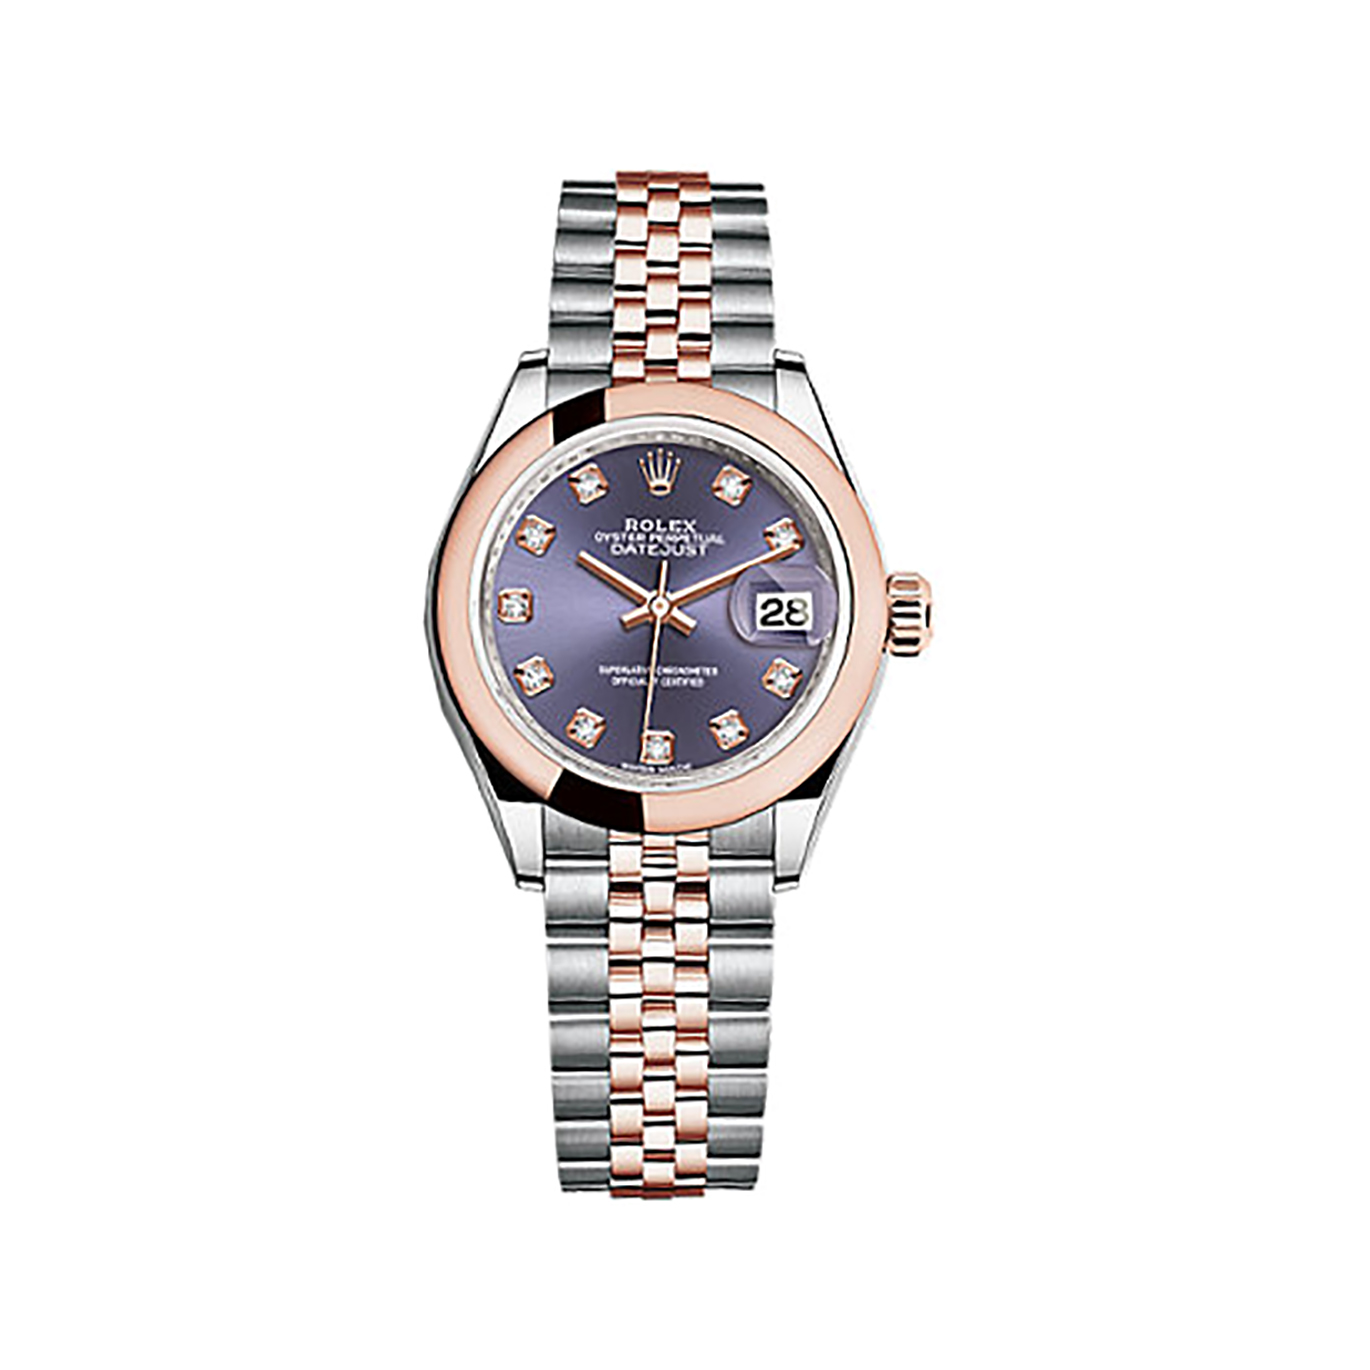 Lady-Datejust 28 279161 Rose Gold & Stainless Steel Watch (Aubergine Set with Diamonds)